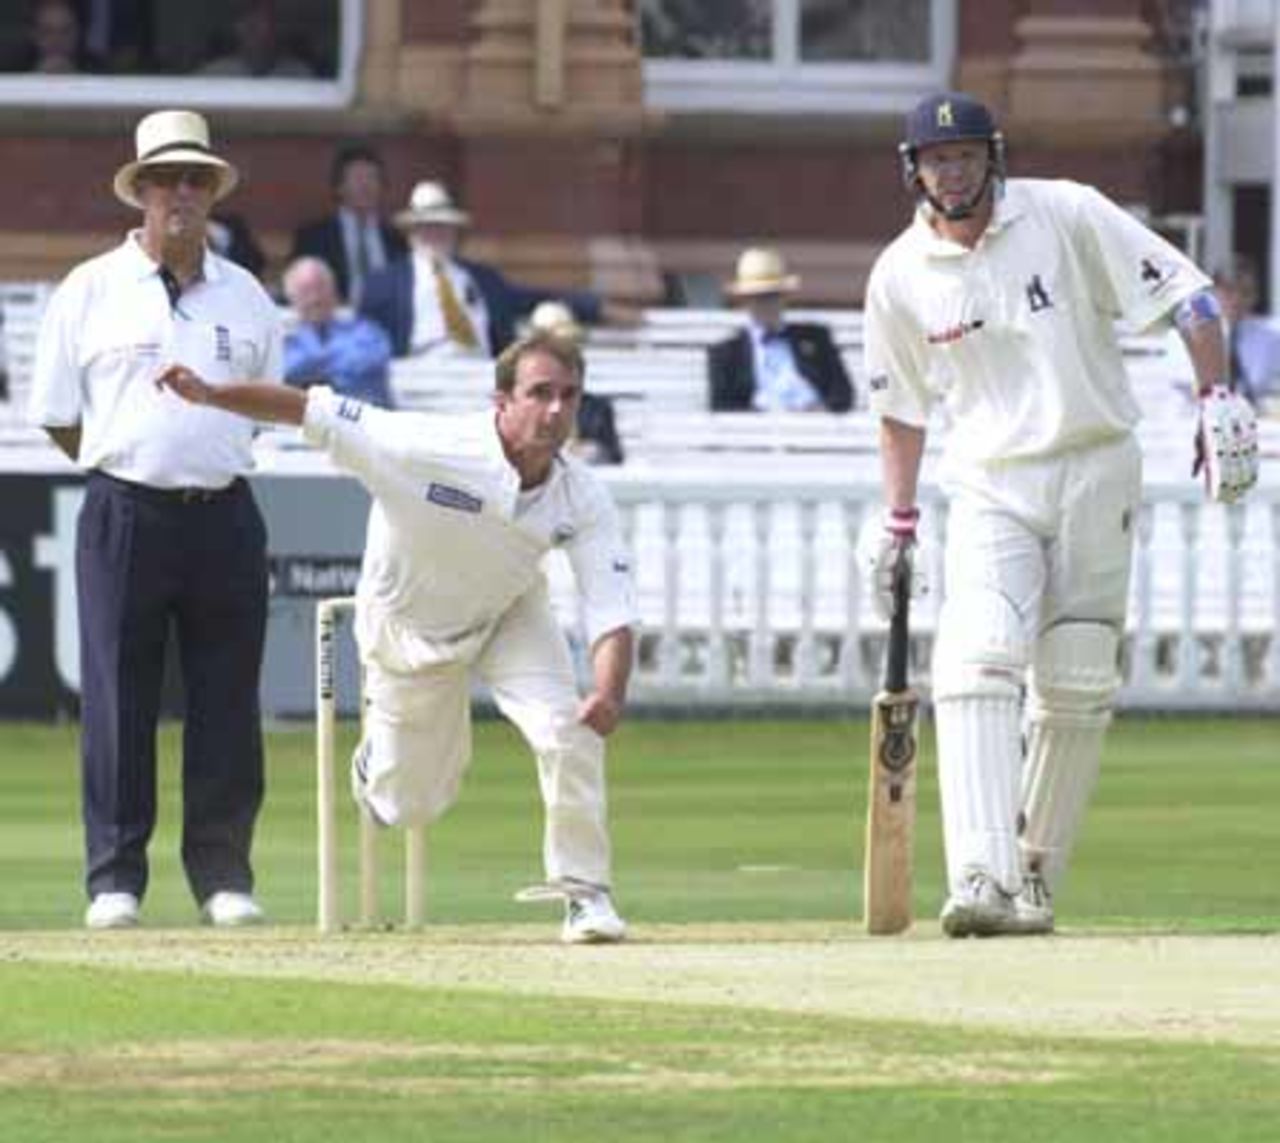 NatWest final Lord's Warwickshire v Gloucestershire 2000